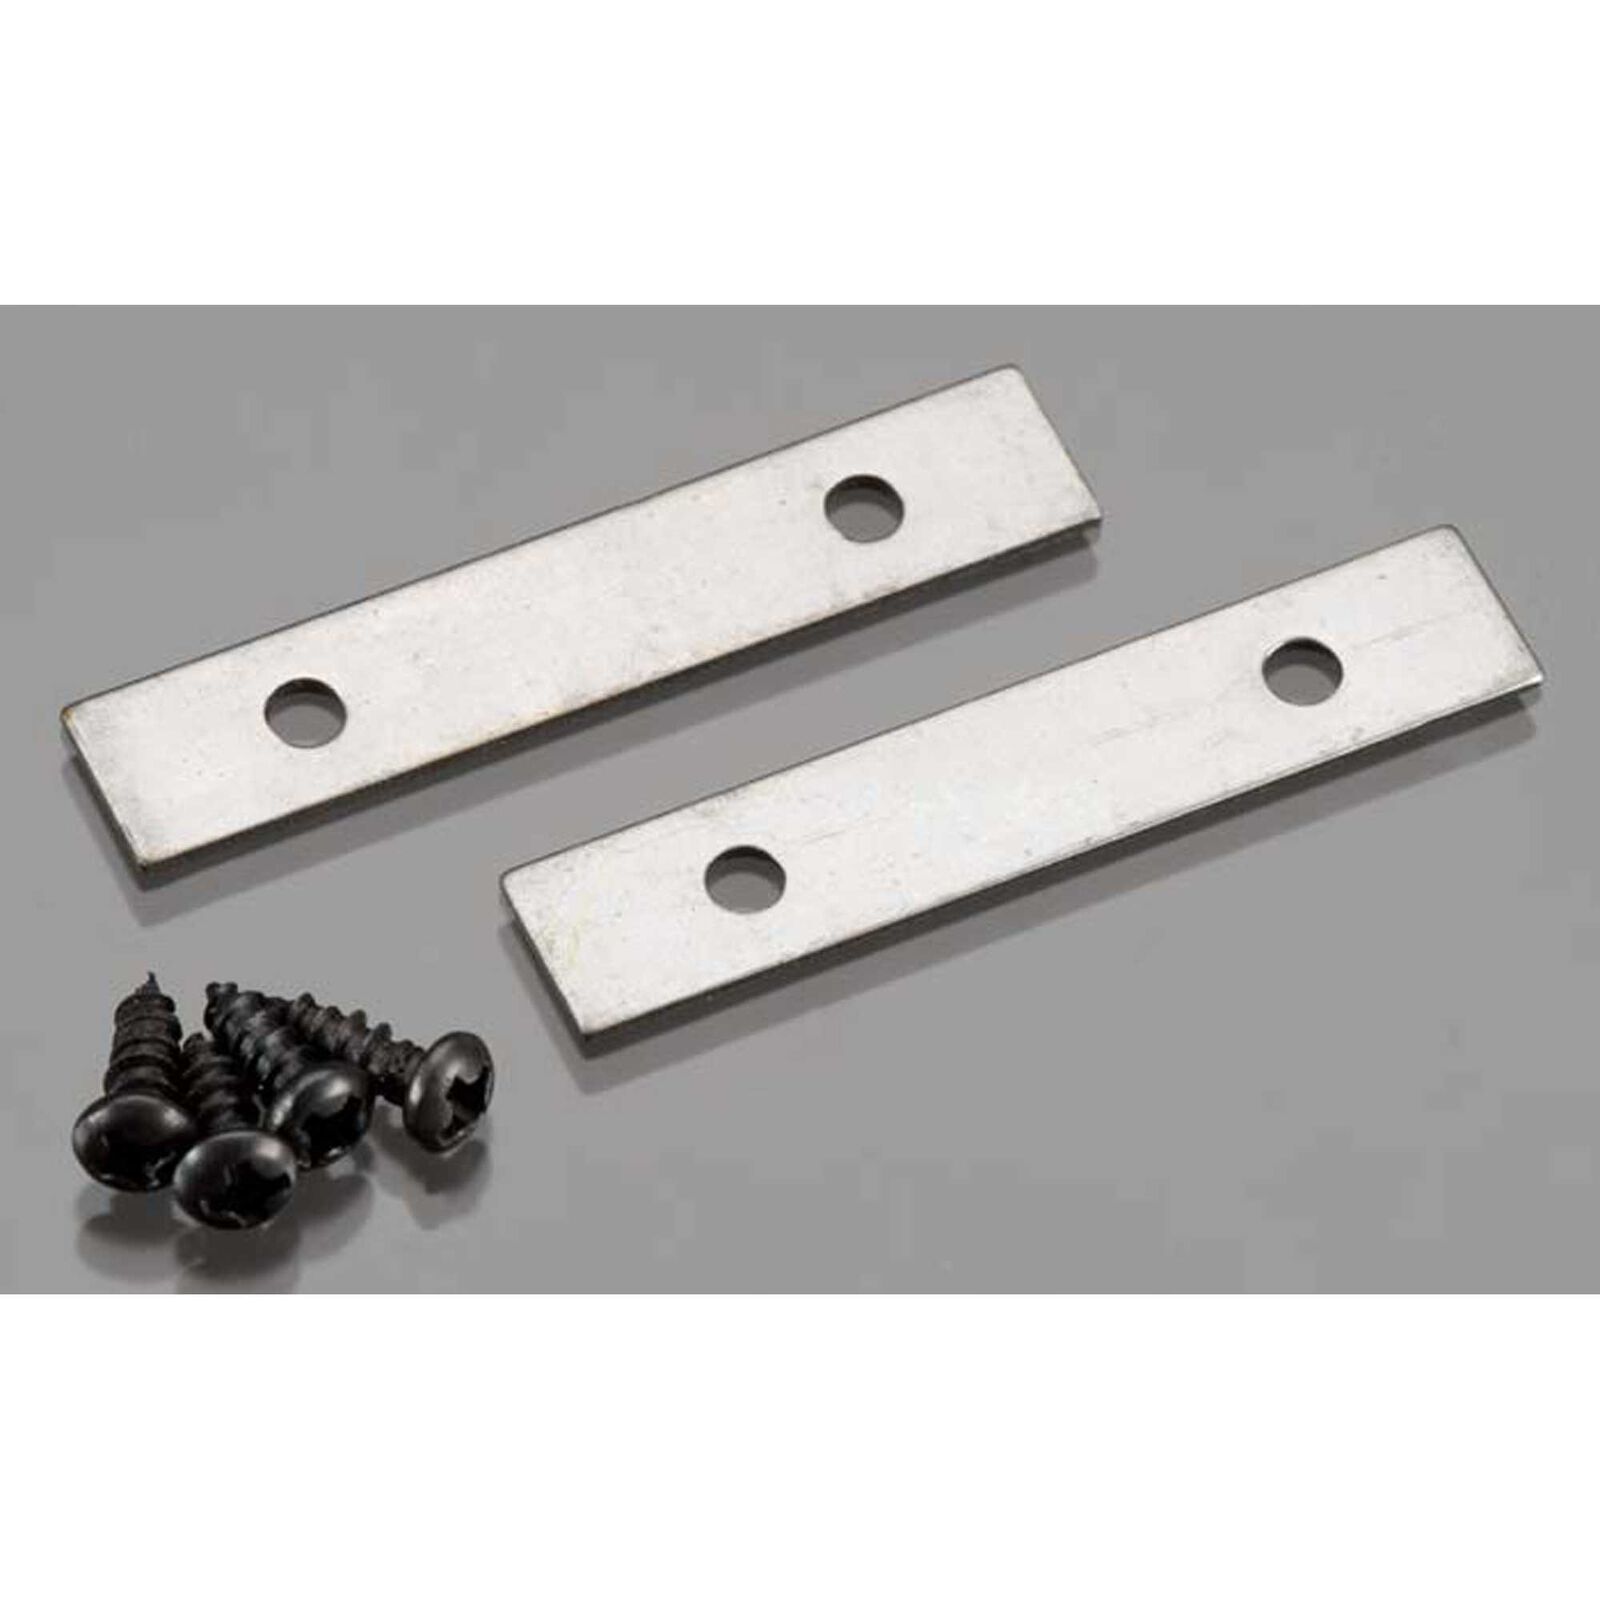 Reed Valve Plates: DLE-170 (2)